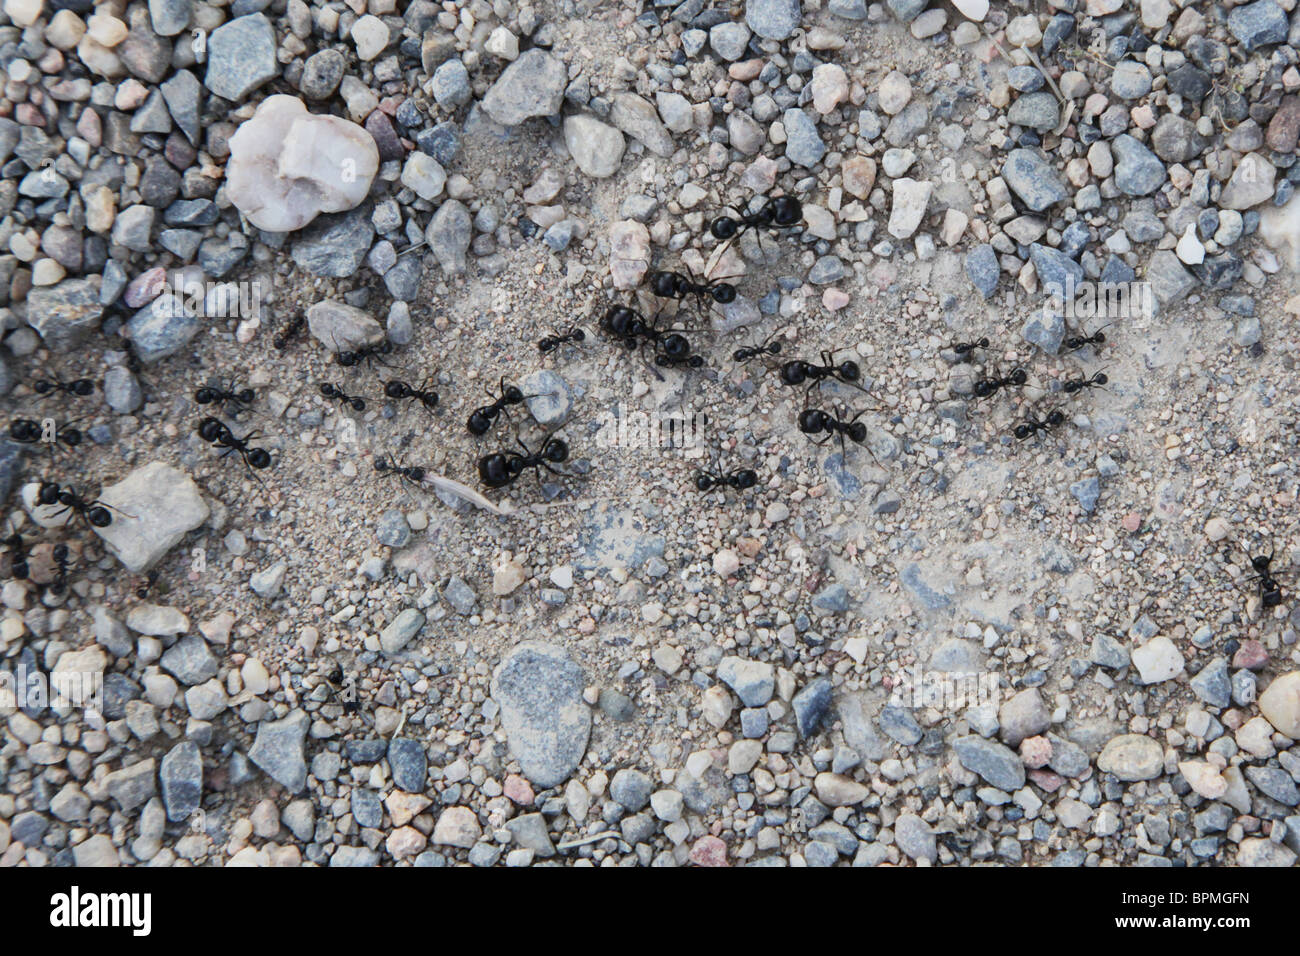 A line of ants on a path through stones and pebbles Stock Photo